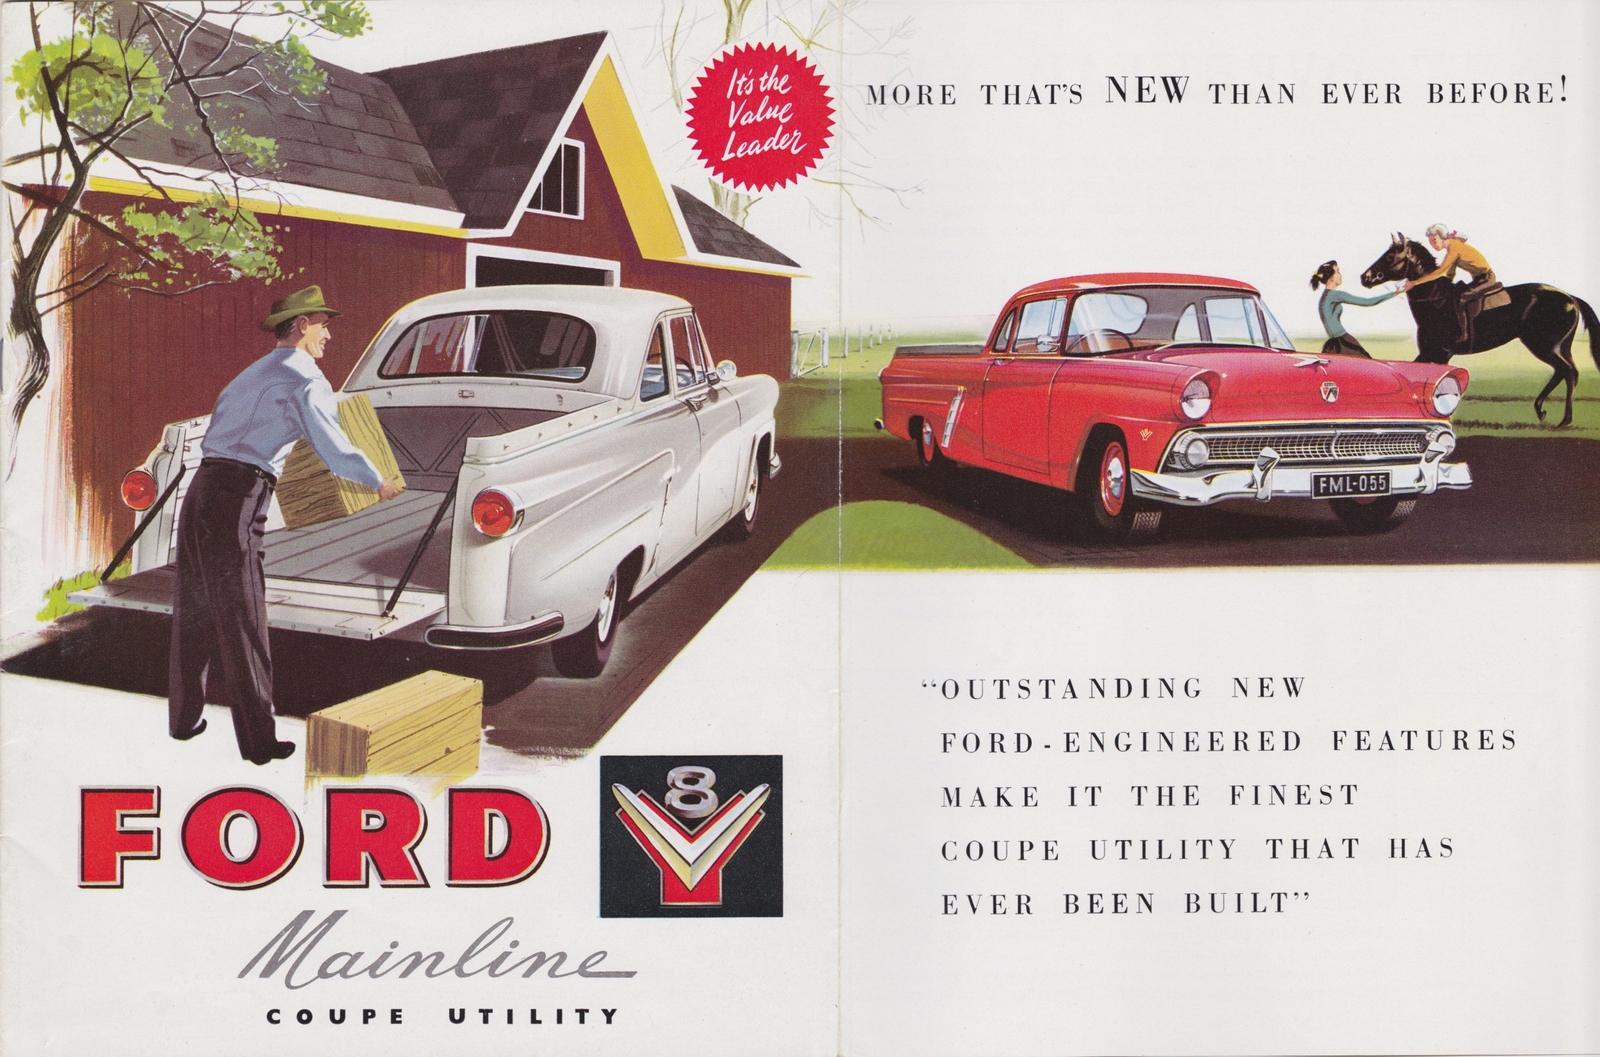 n_1955 Ford Mainline Coupe Utility-01-02.jpg